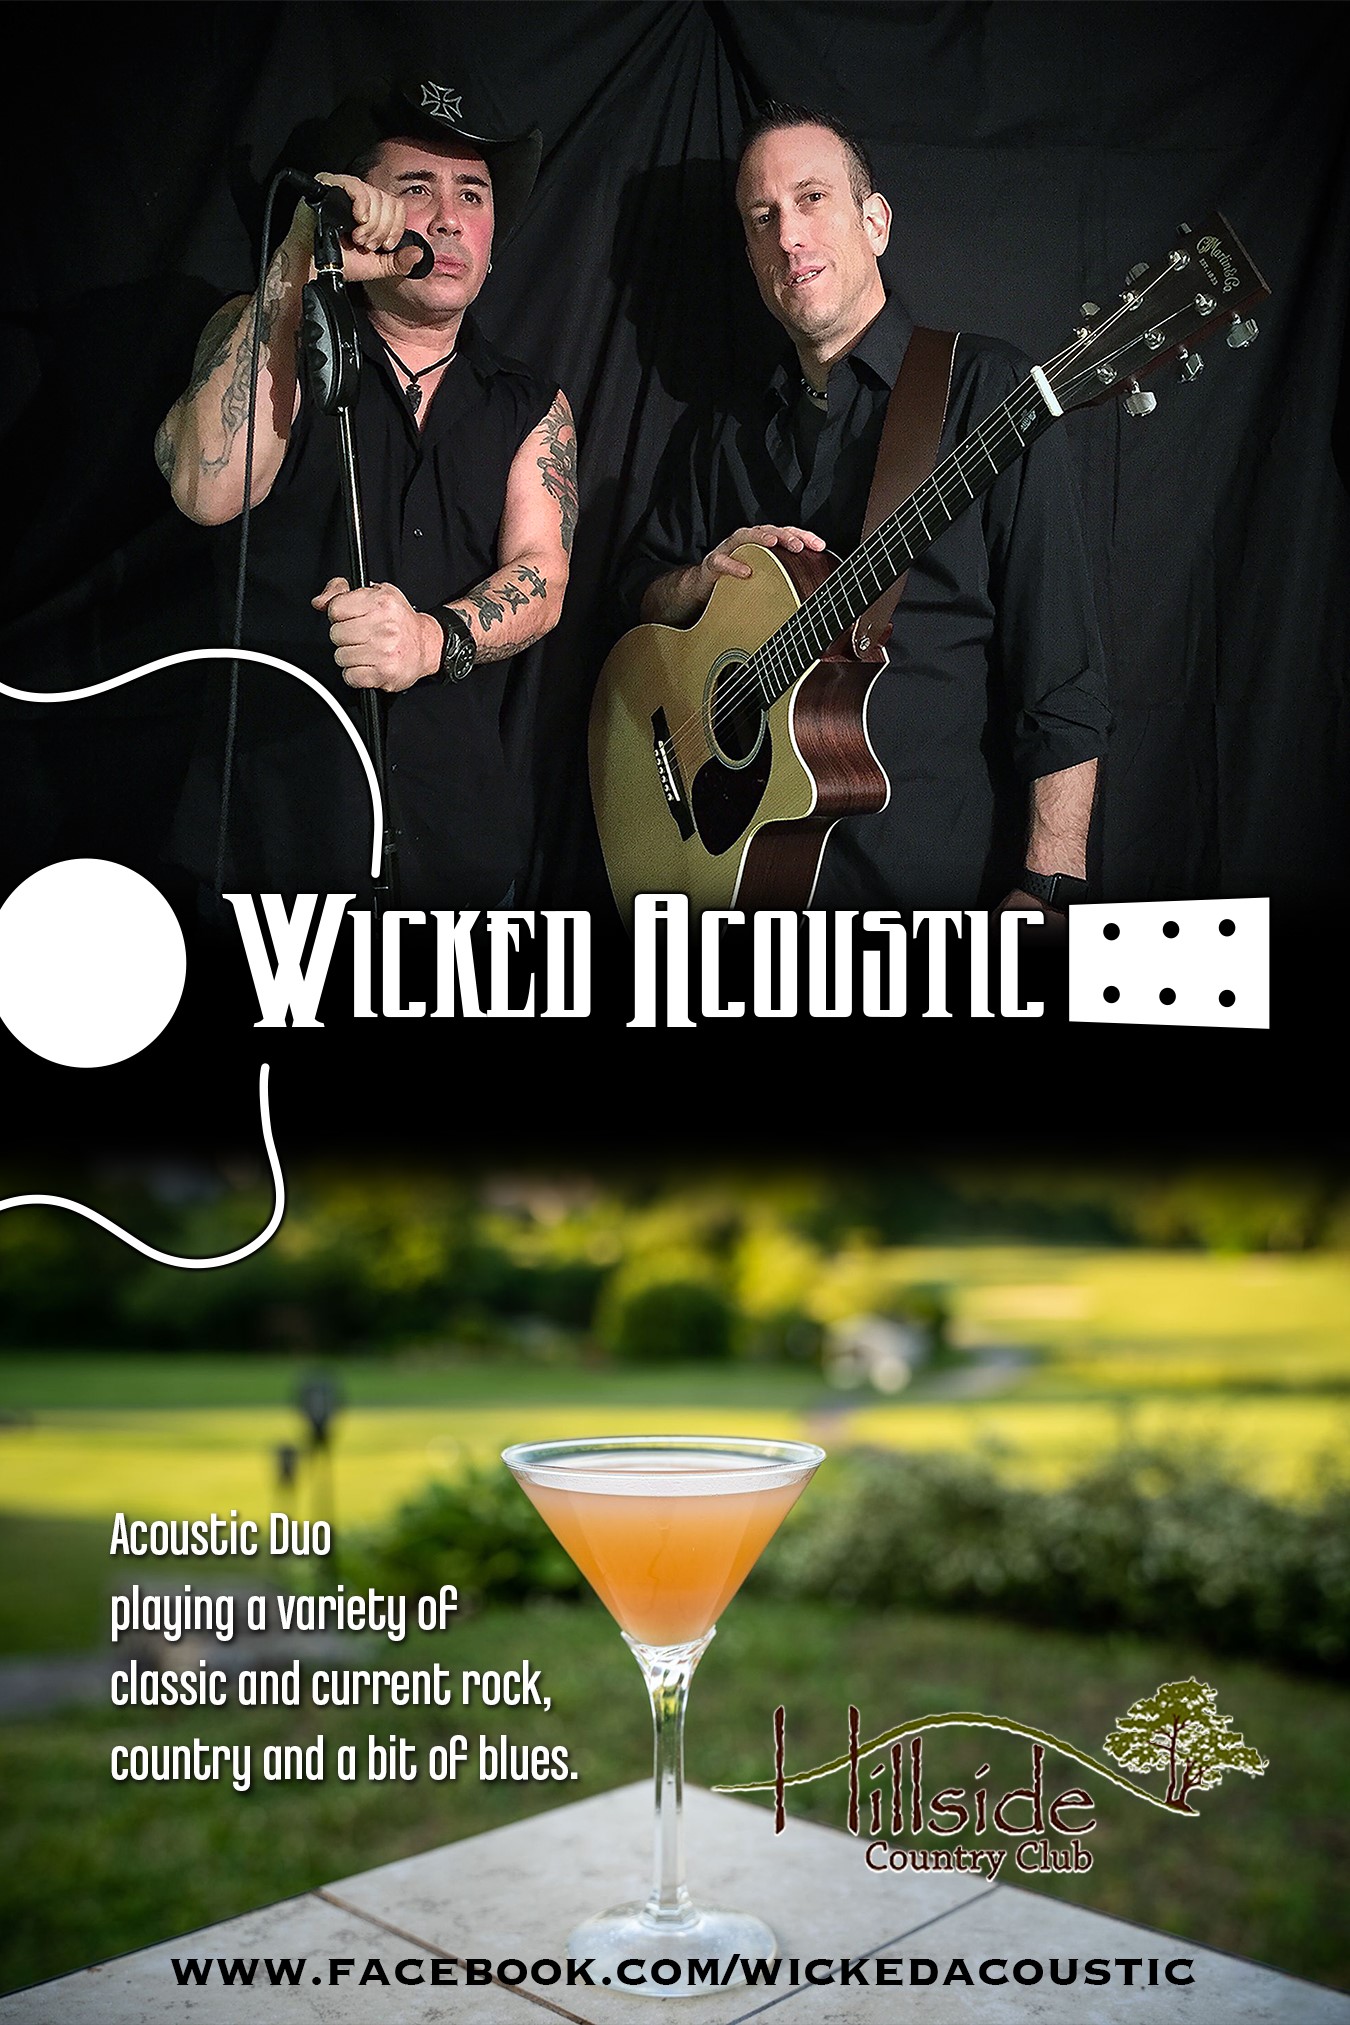 wickedaccoustic